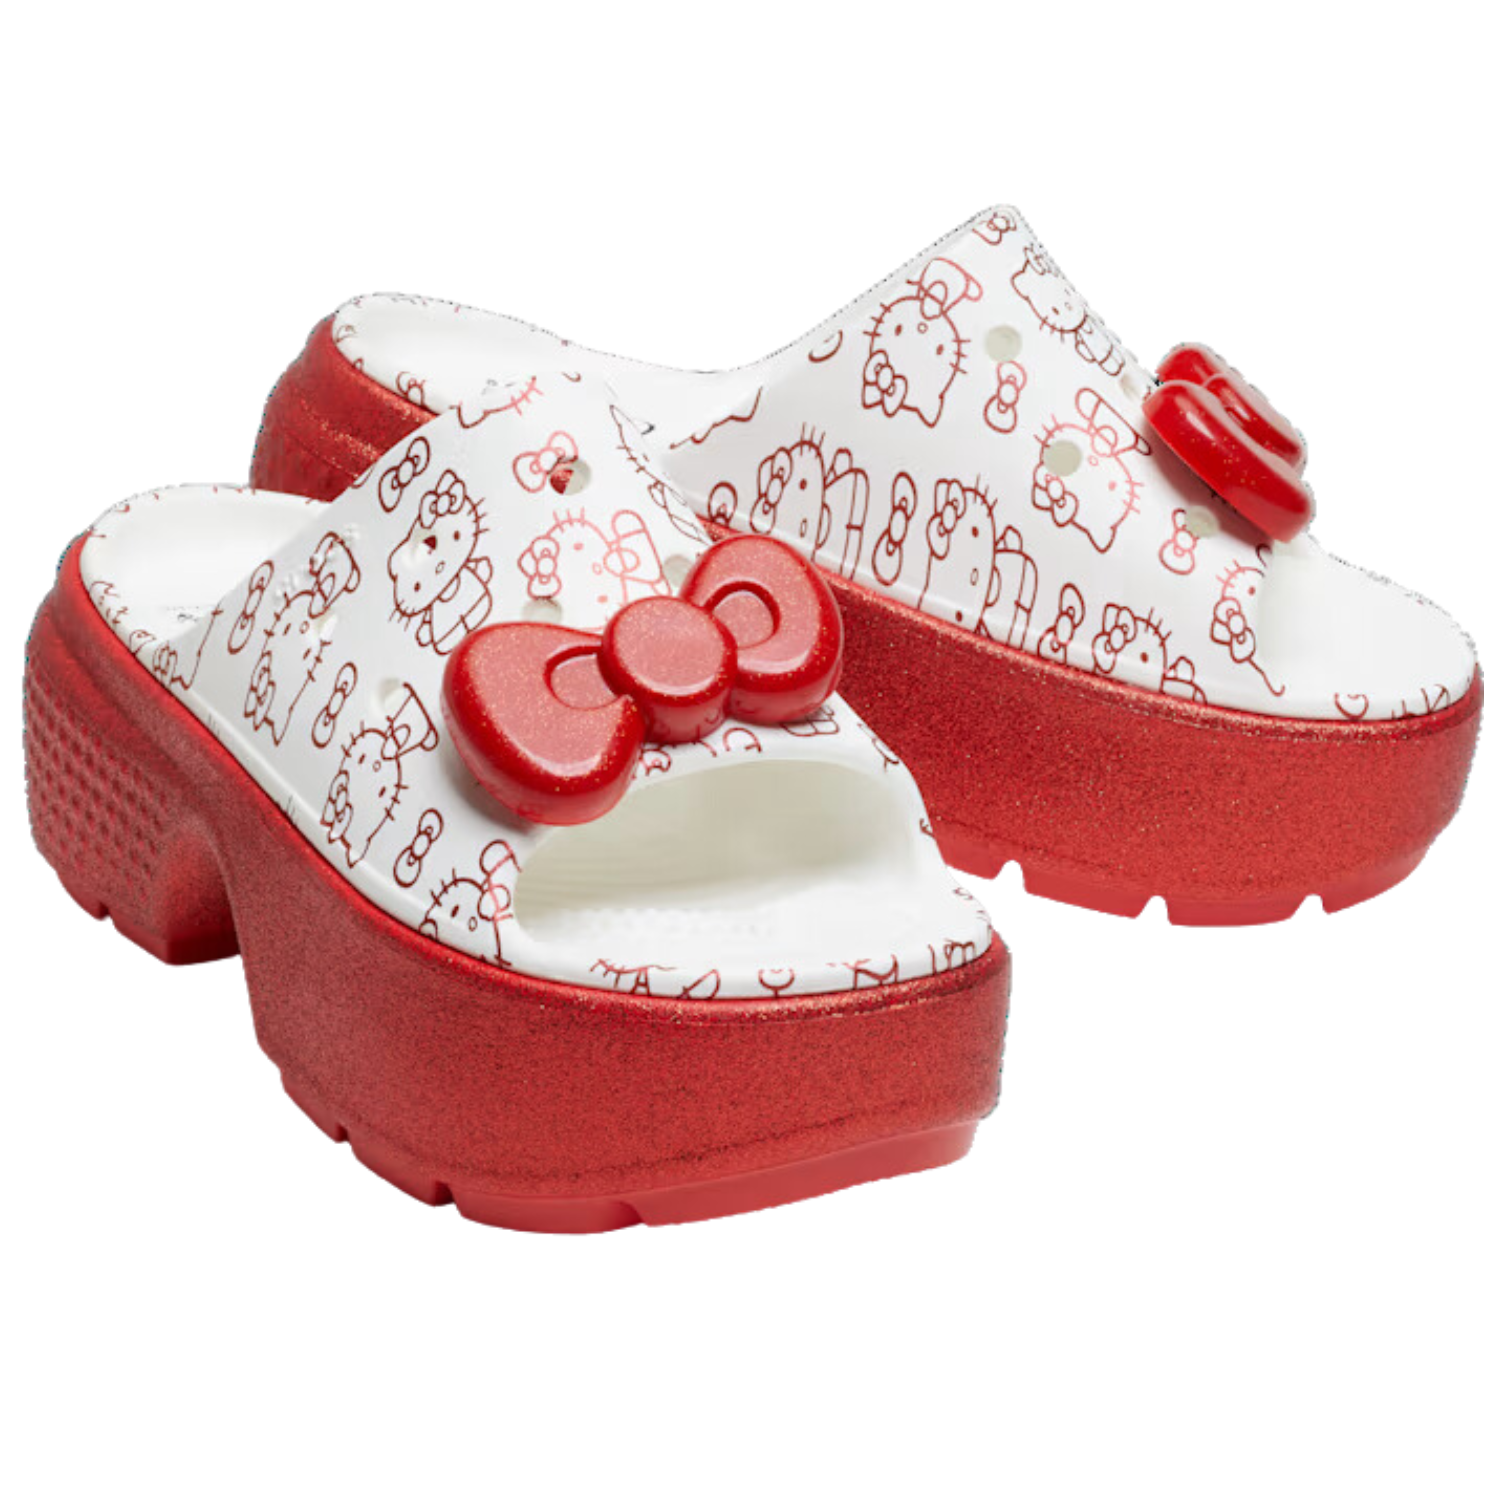 This image shows a pair of white open toed clogs with the Hello Kitty figure and box on them with a red thick heel